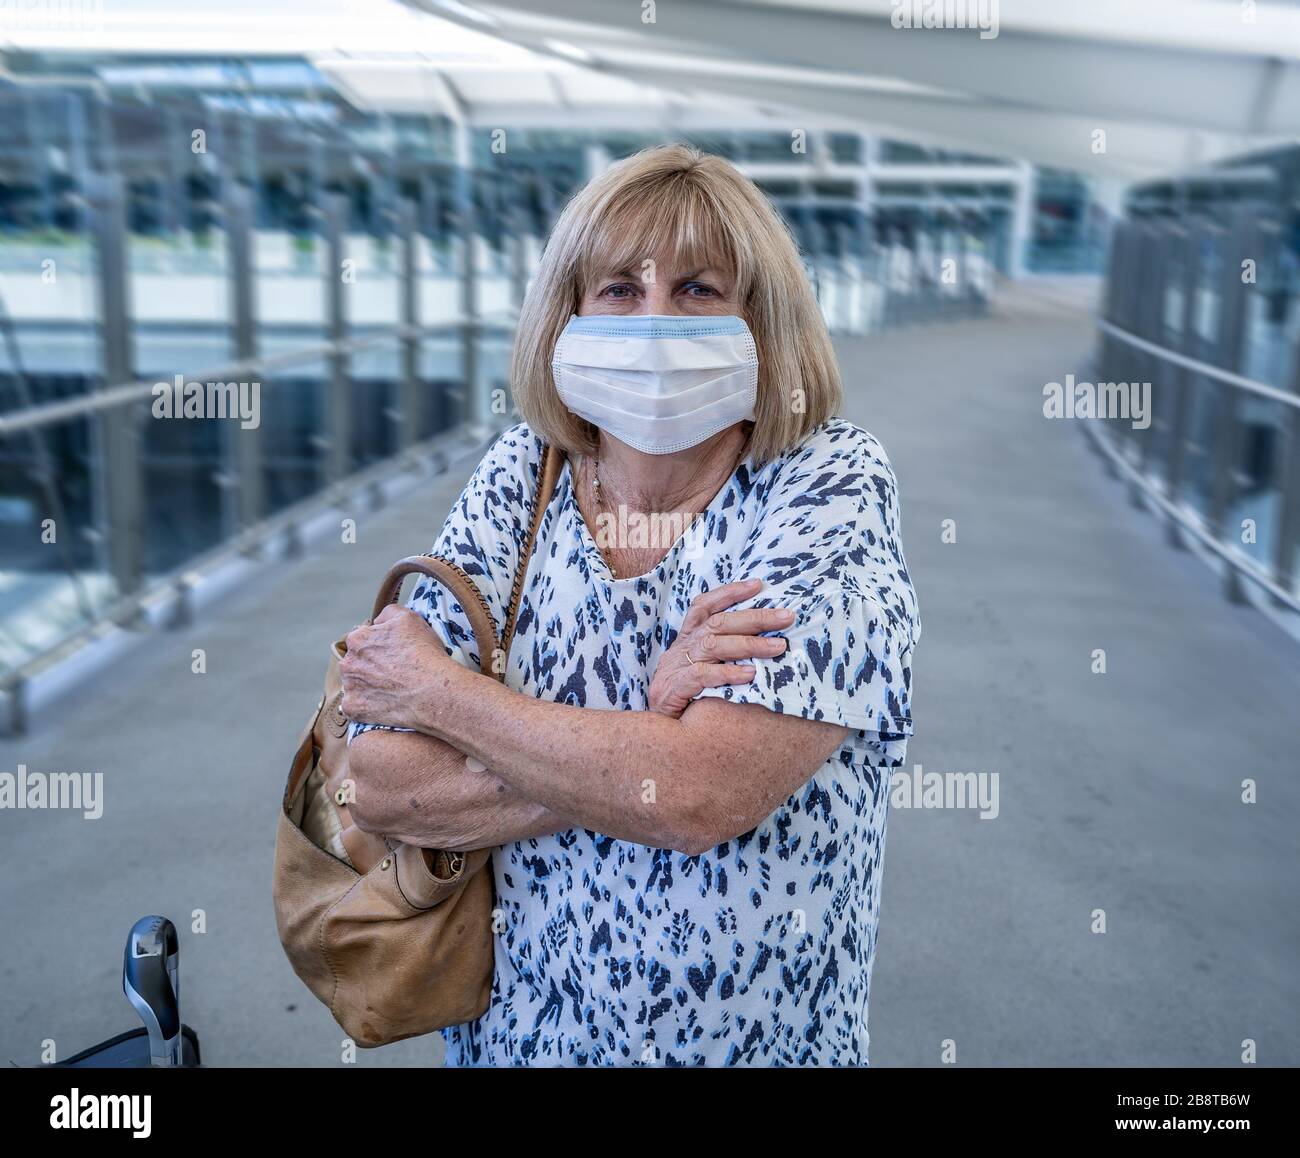 Coronavirus outbreak travel ban and restrictions. Traveler man with face mask at international airport affected by flight cancellation. COVID-19 pande Stock Photo